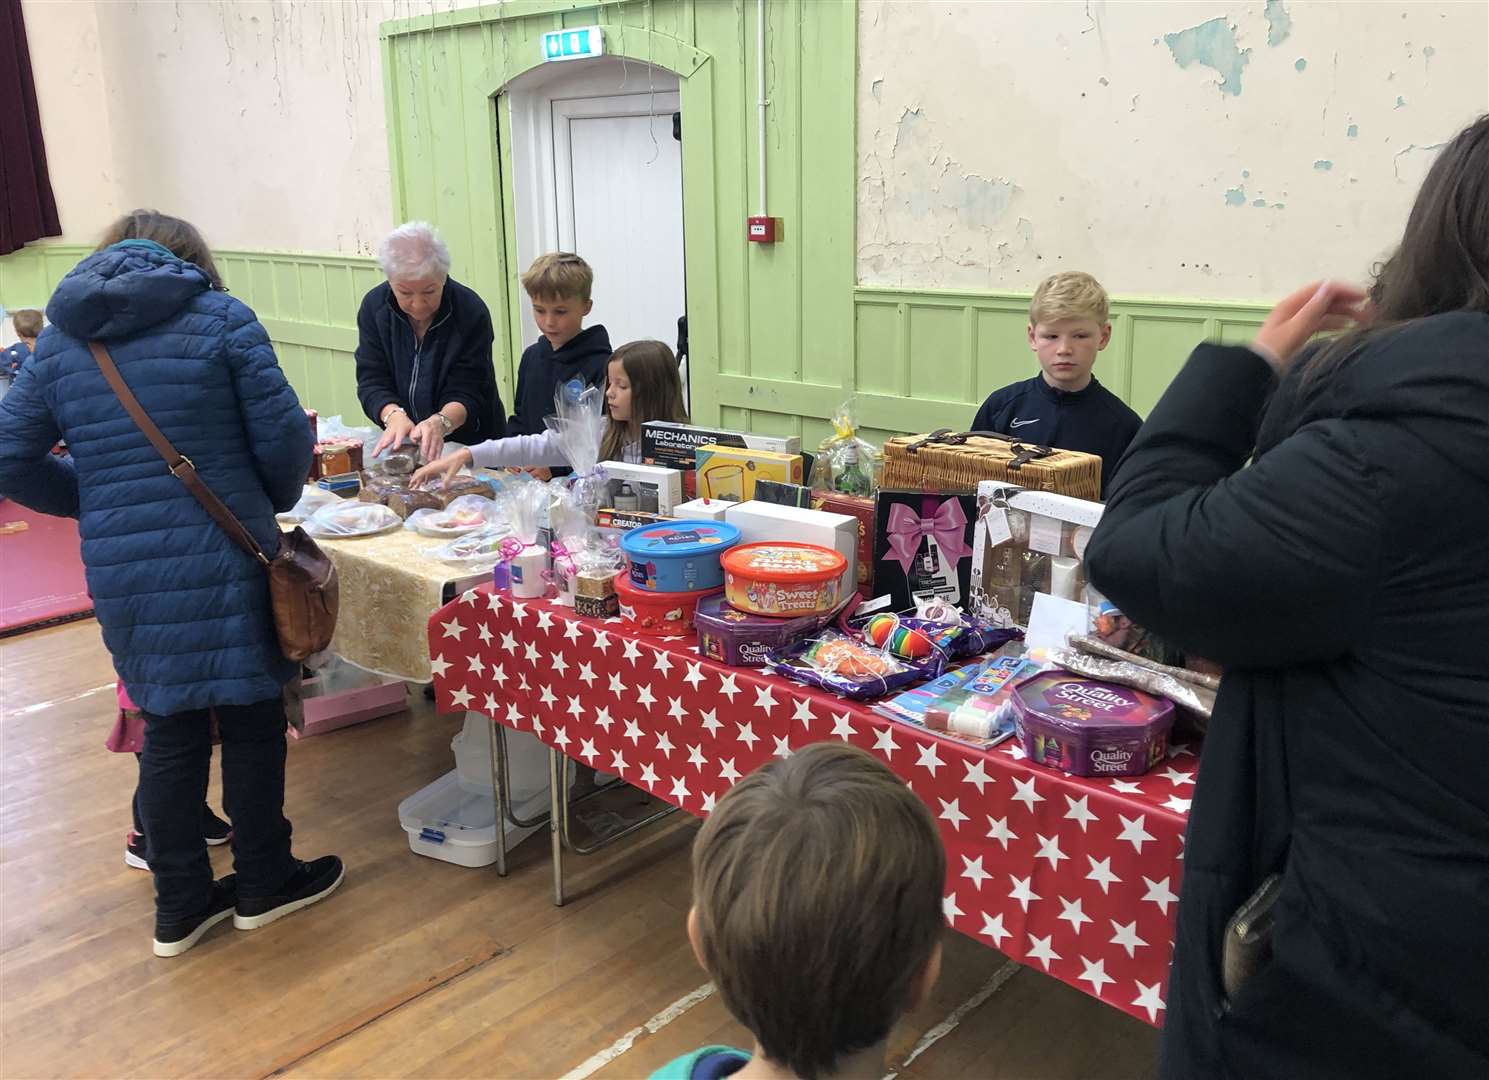 A raffle had more than 20 prizes, while home-baking treats were on sale.